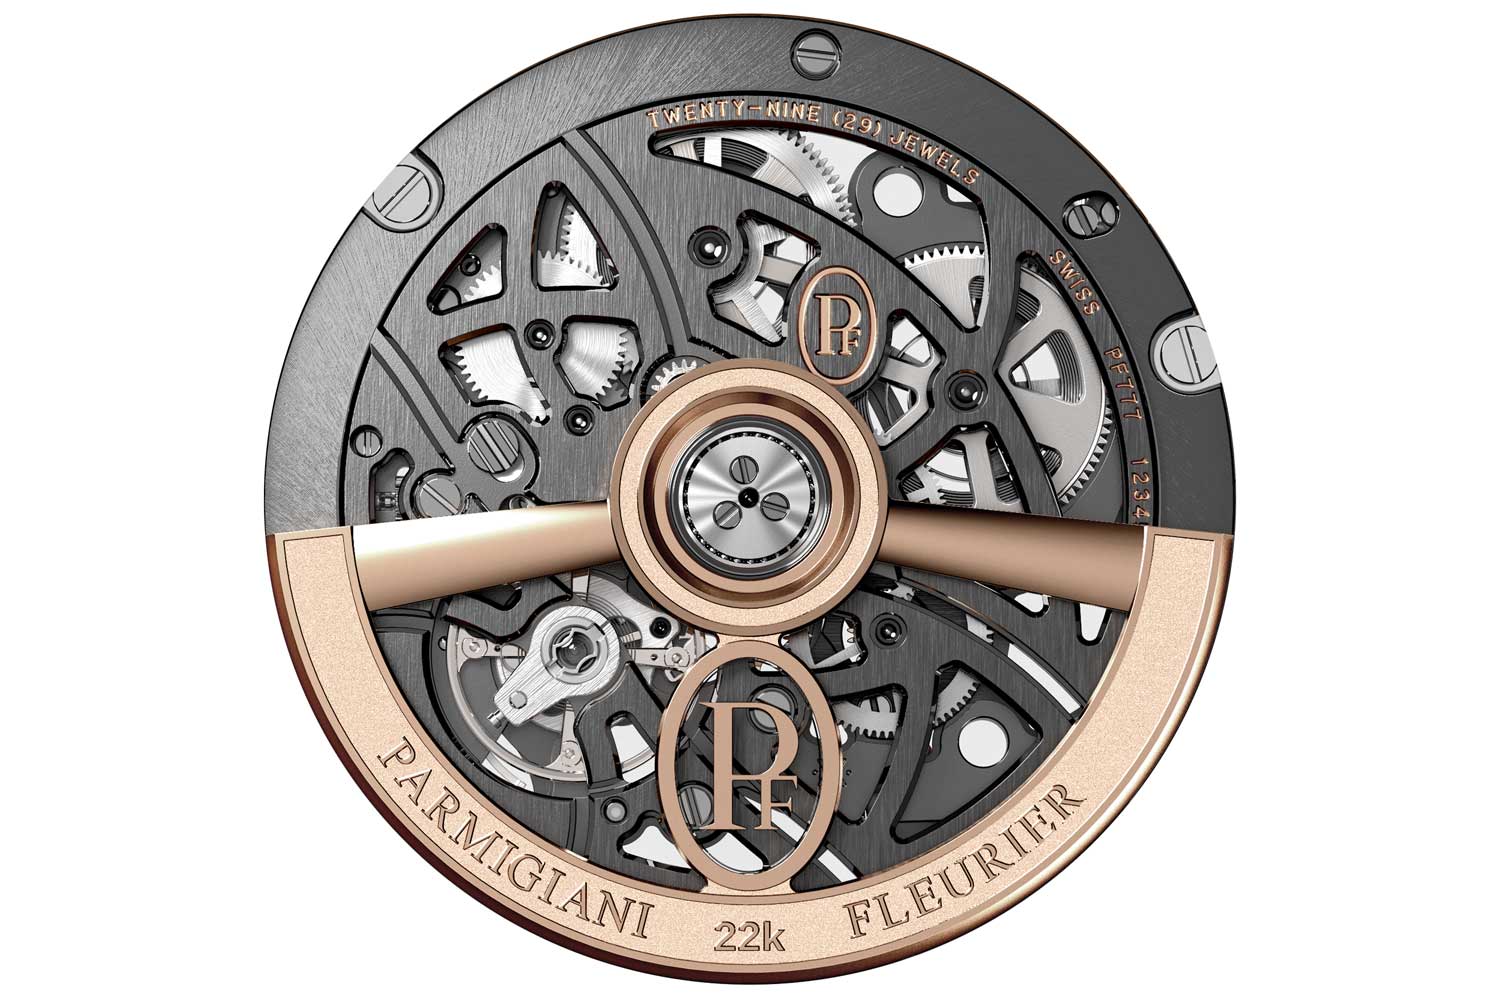 Skeletonised self-winding caliber PF777 with 60 hours of power reserve